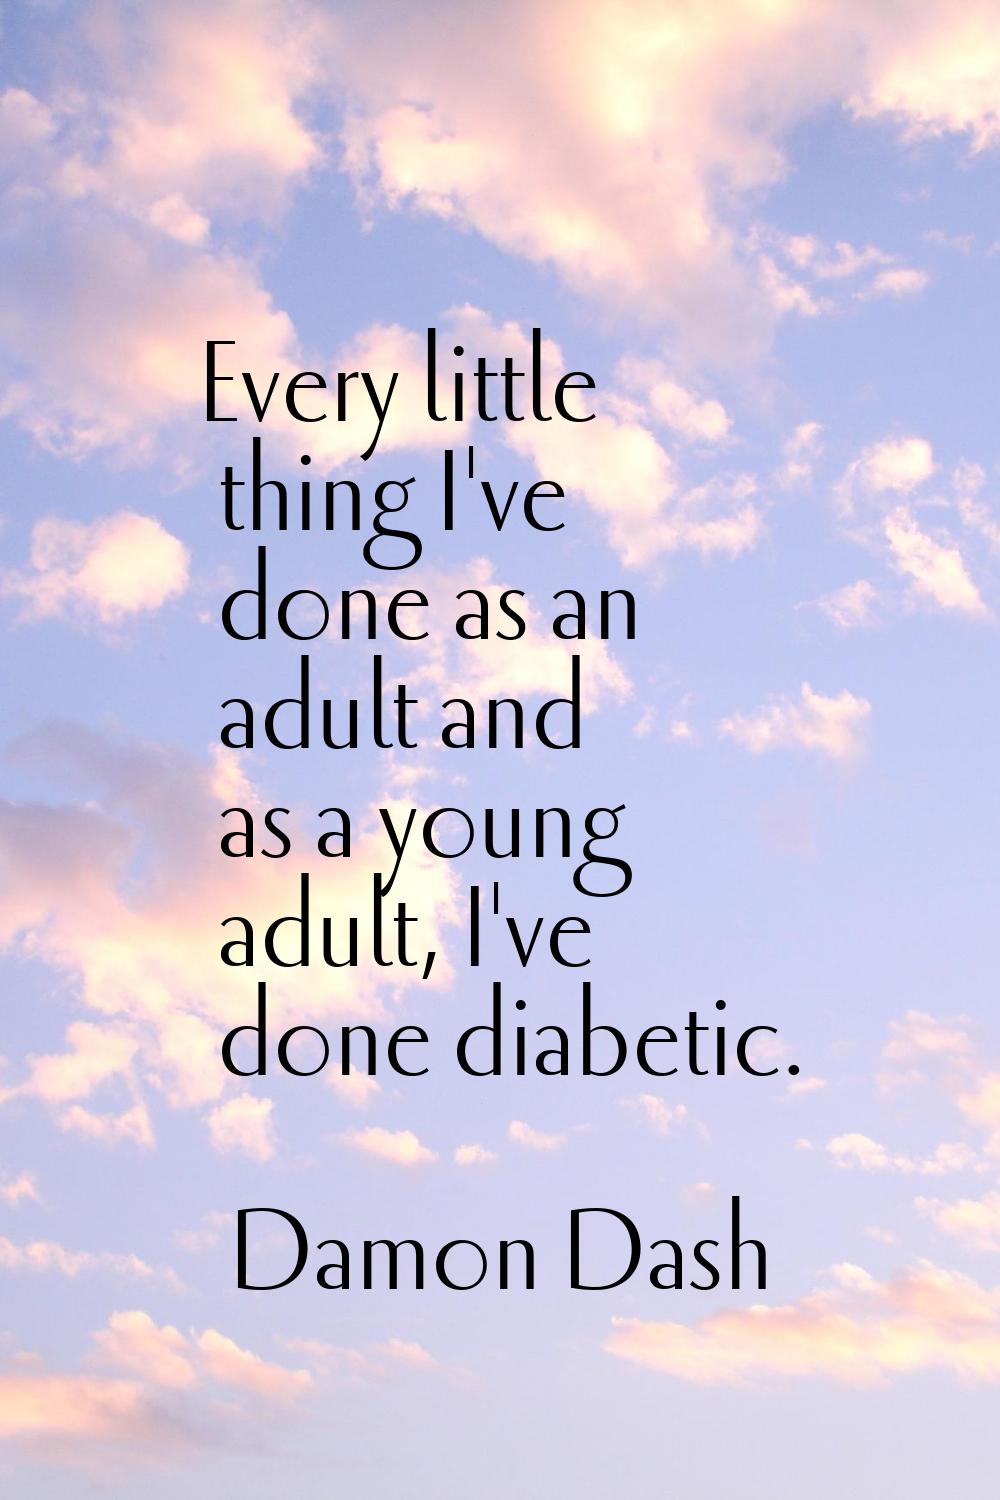 Every little thing I've done as an adult and as a young adult, I've done diabetic.